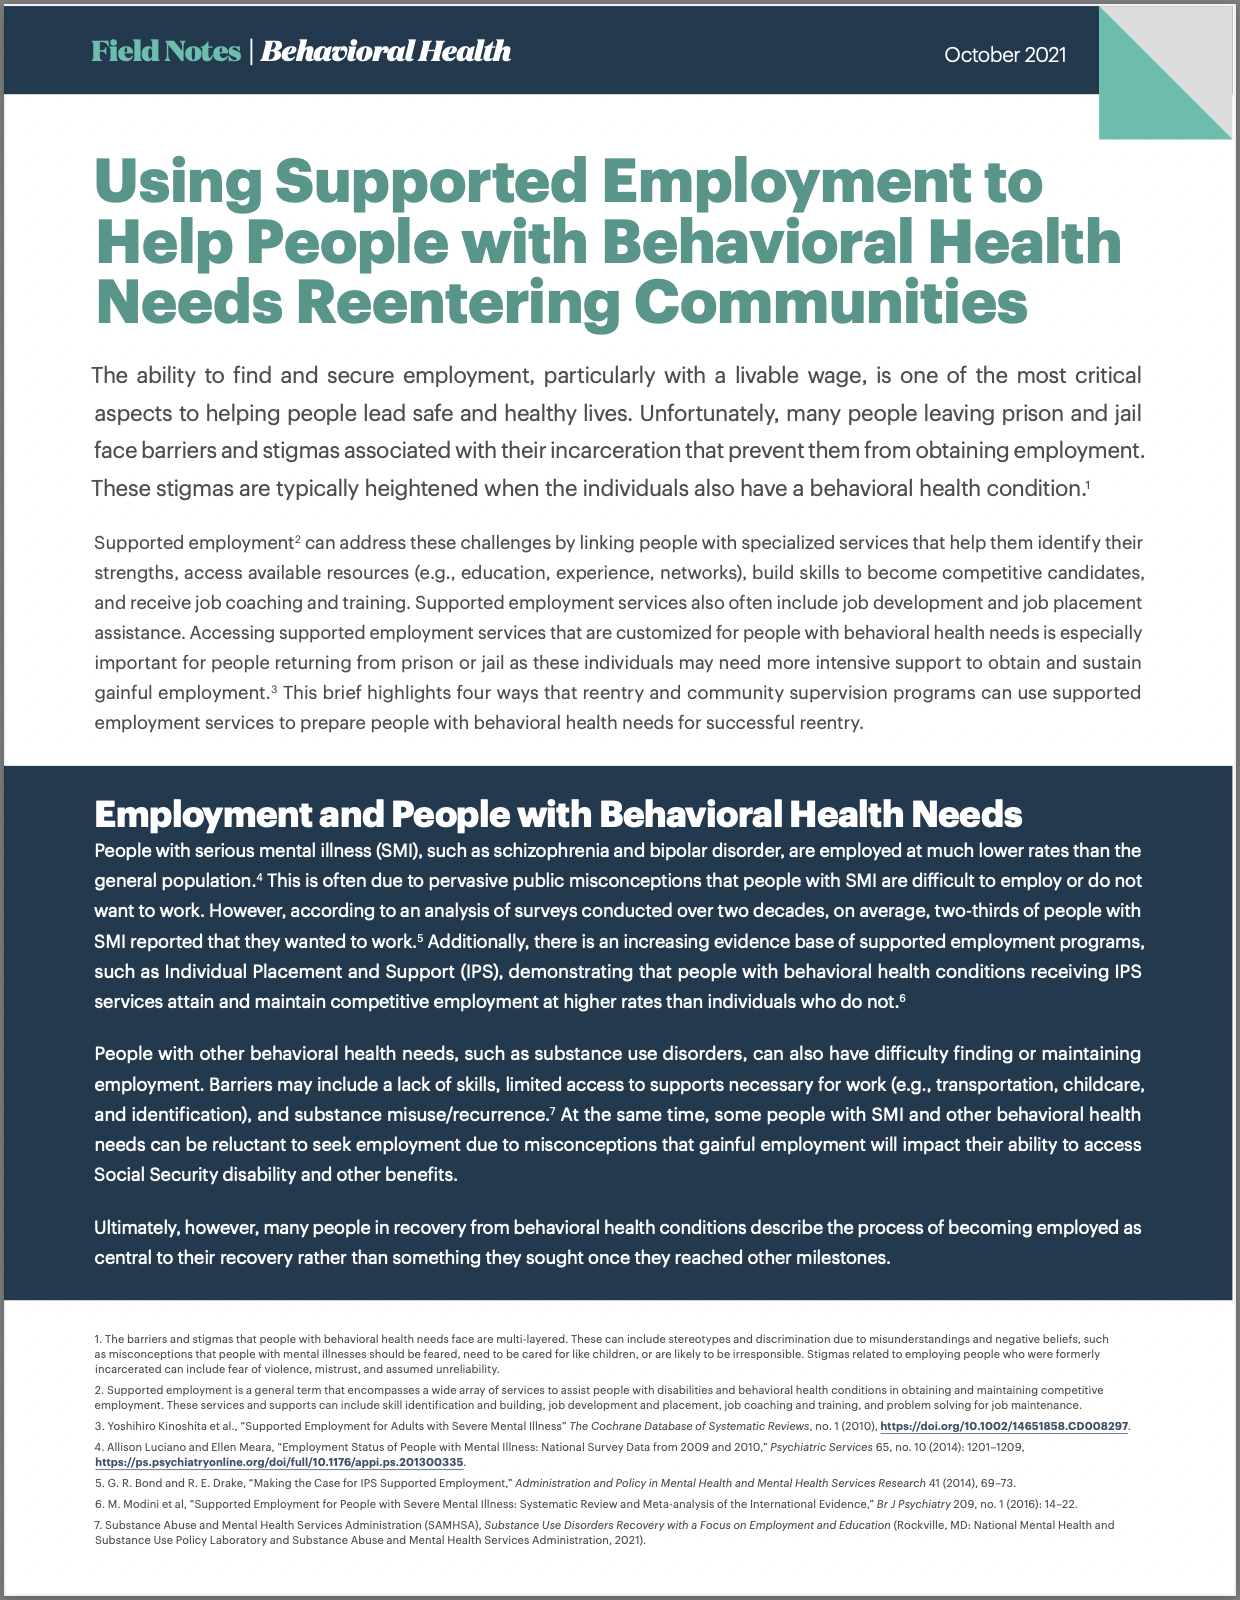 Using Supported Employment to Help People with Behavioral Health Needs brief cover image